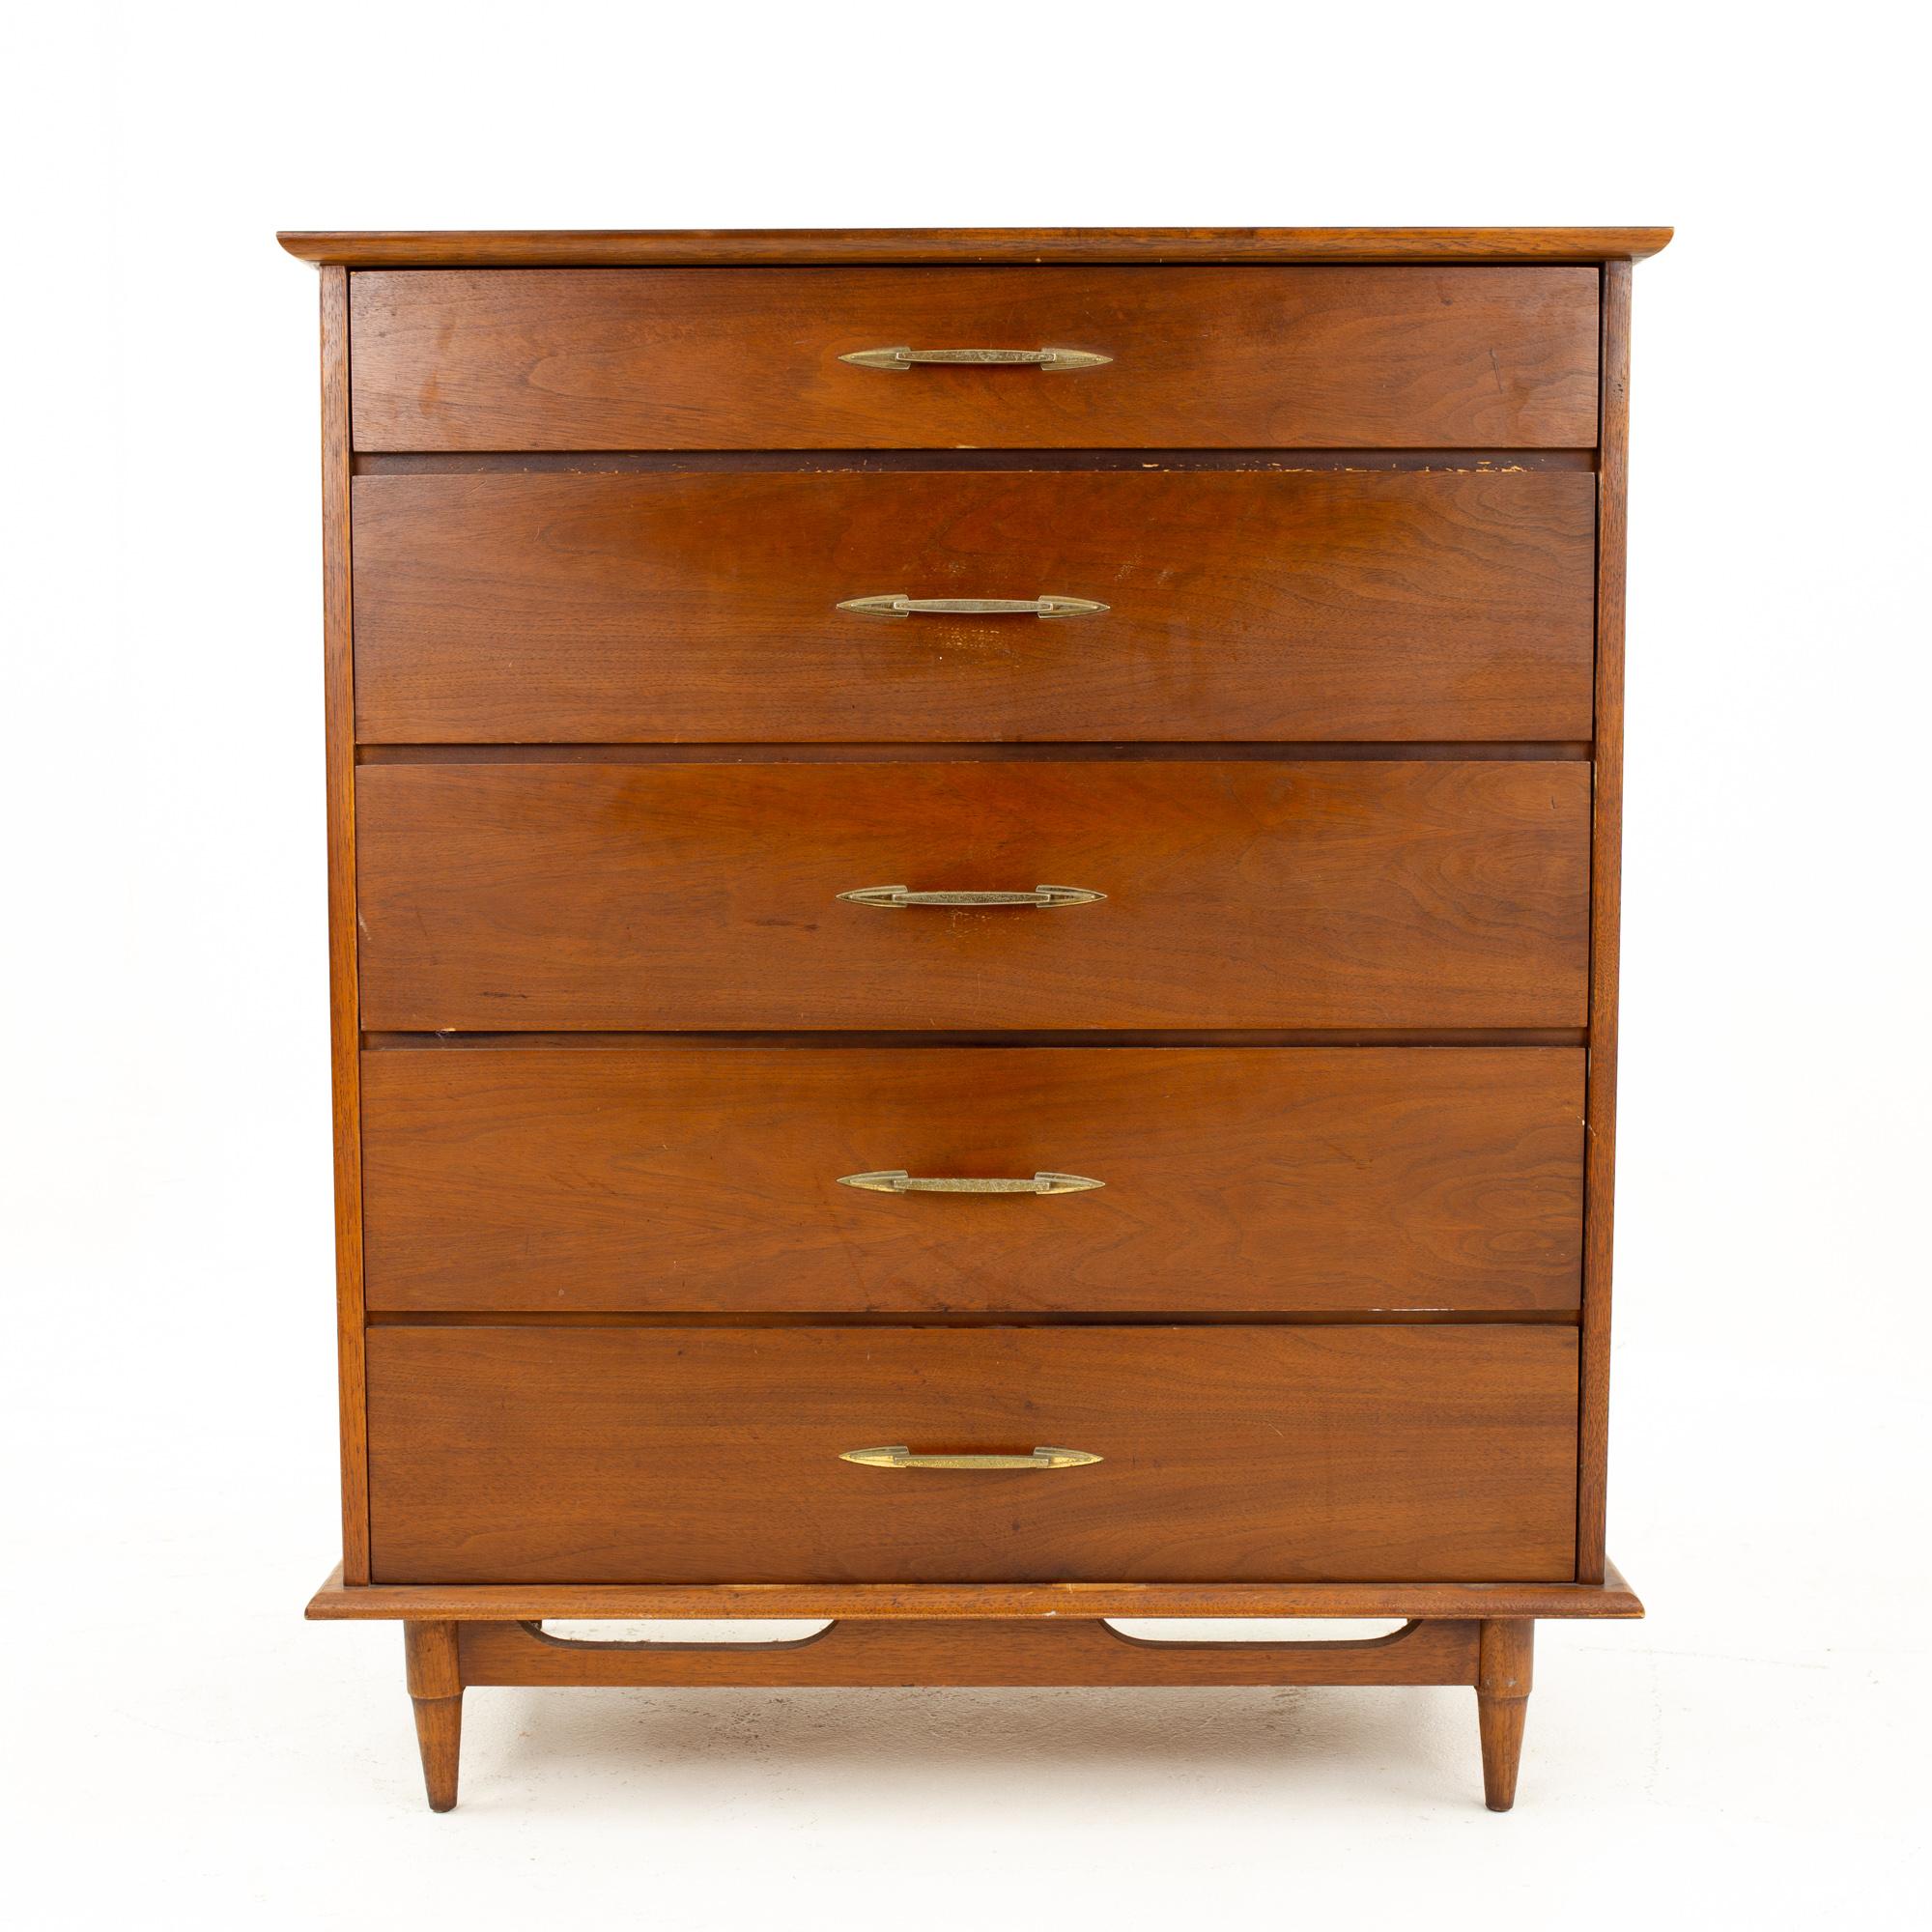 Lane Mid Century 5-drawer highboy dresser
Dresser measures: 38 wide x 19.5 deep x 45 inches high

This price includes getting this piece in what we call restored vintage condition. That means the piece is permanently fixed upon purchase so it’s free